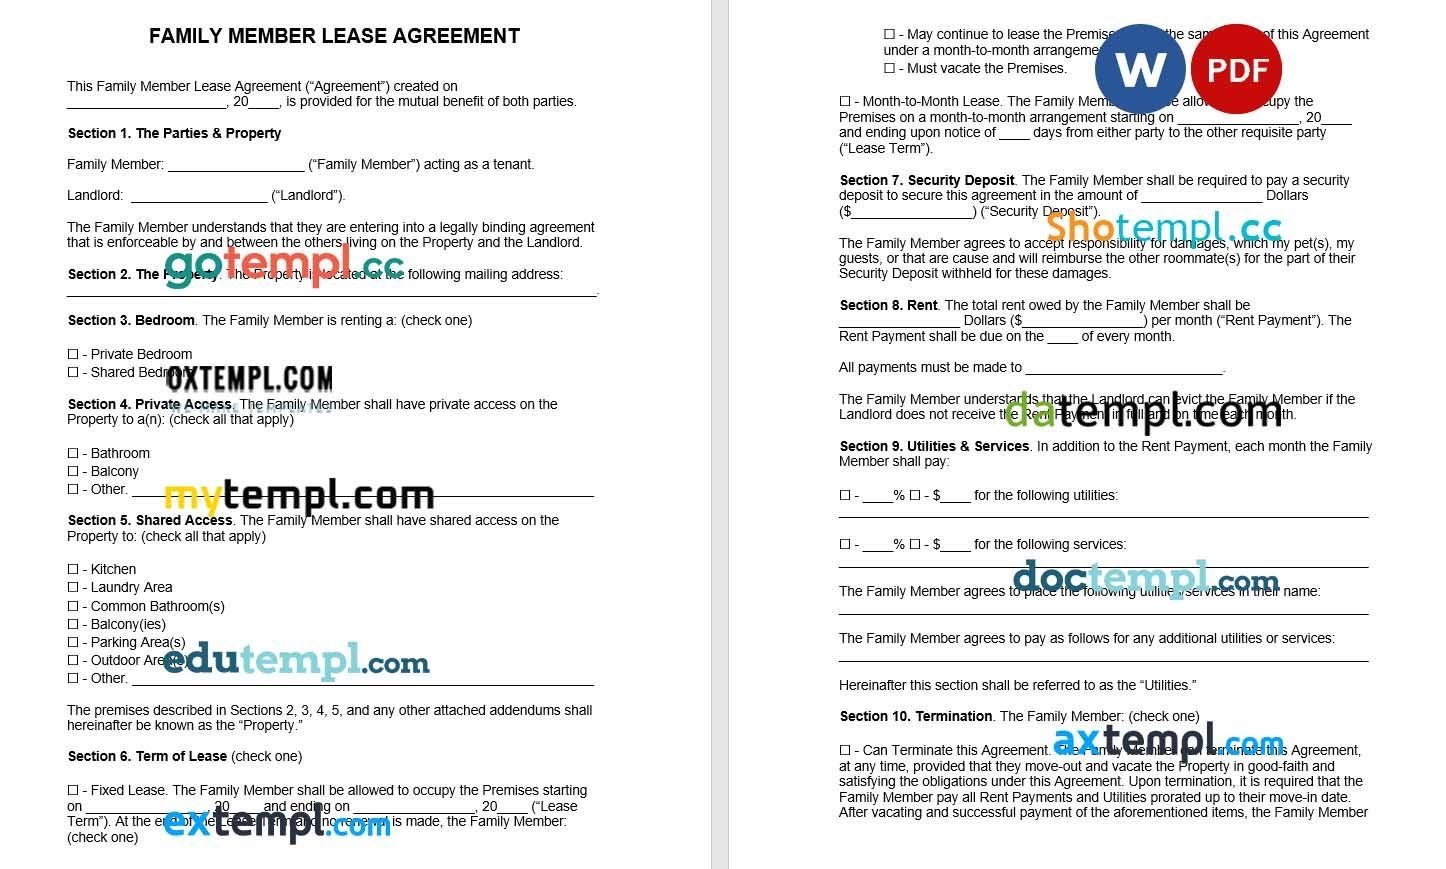 Family Member Lease Agreement Word example, fully editable